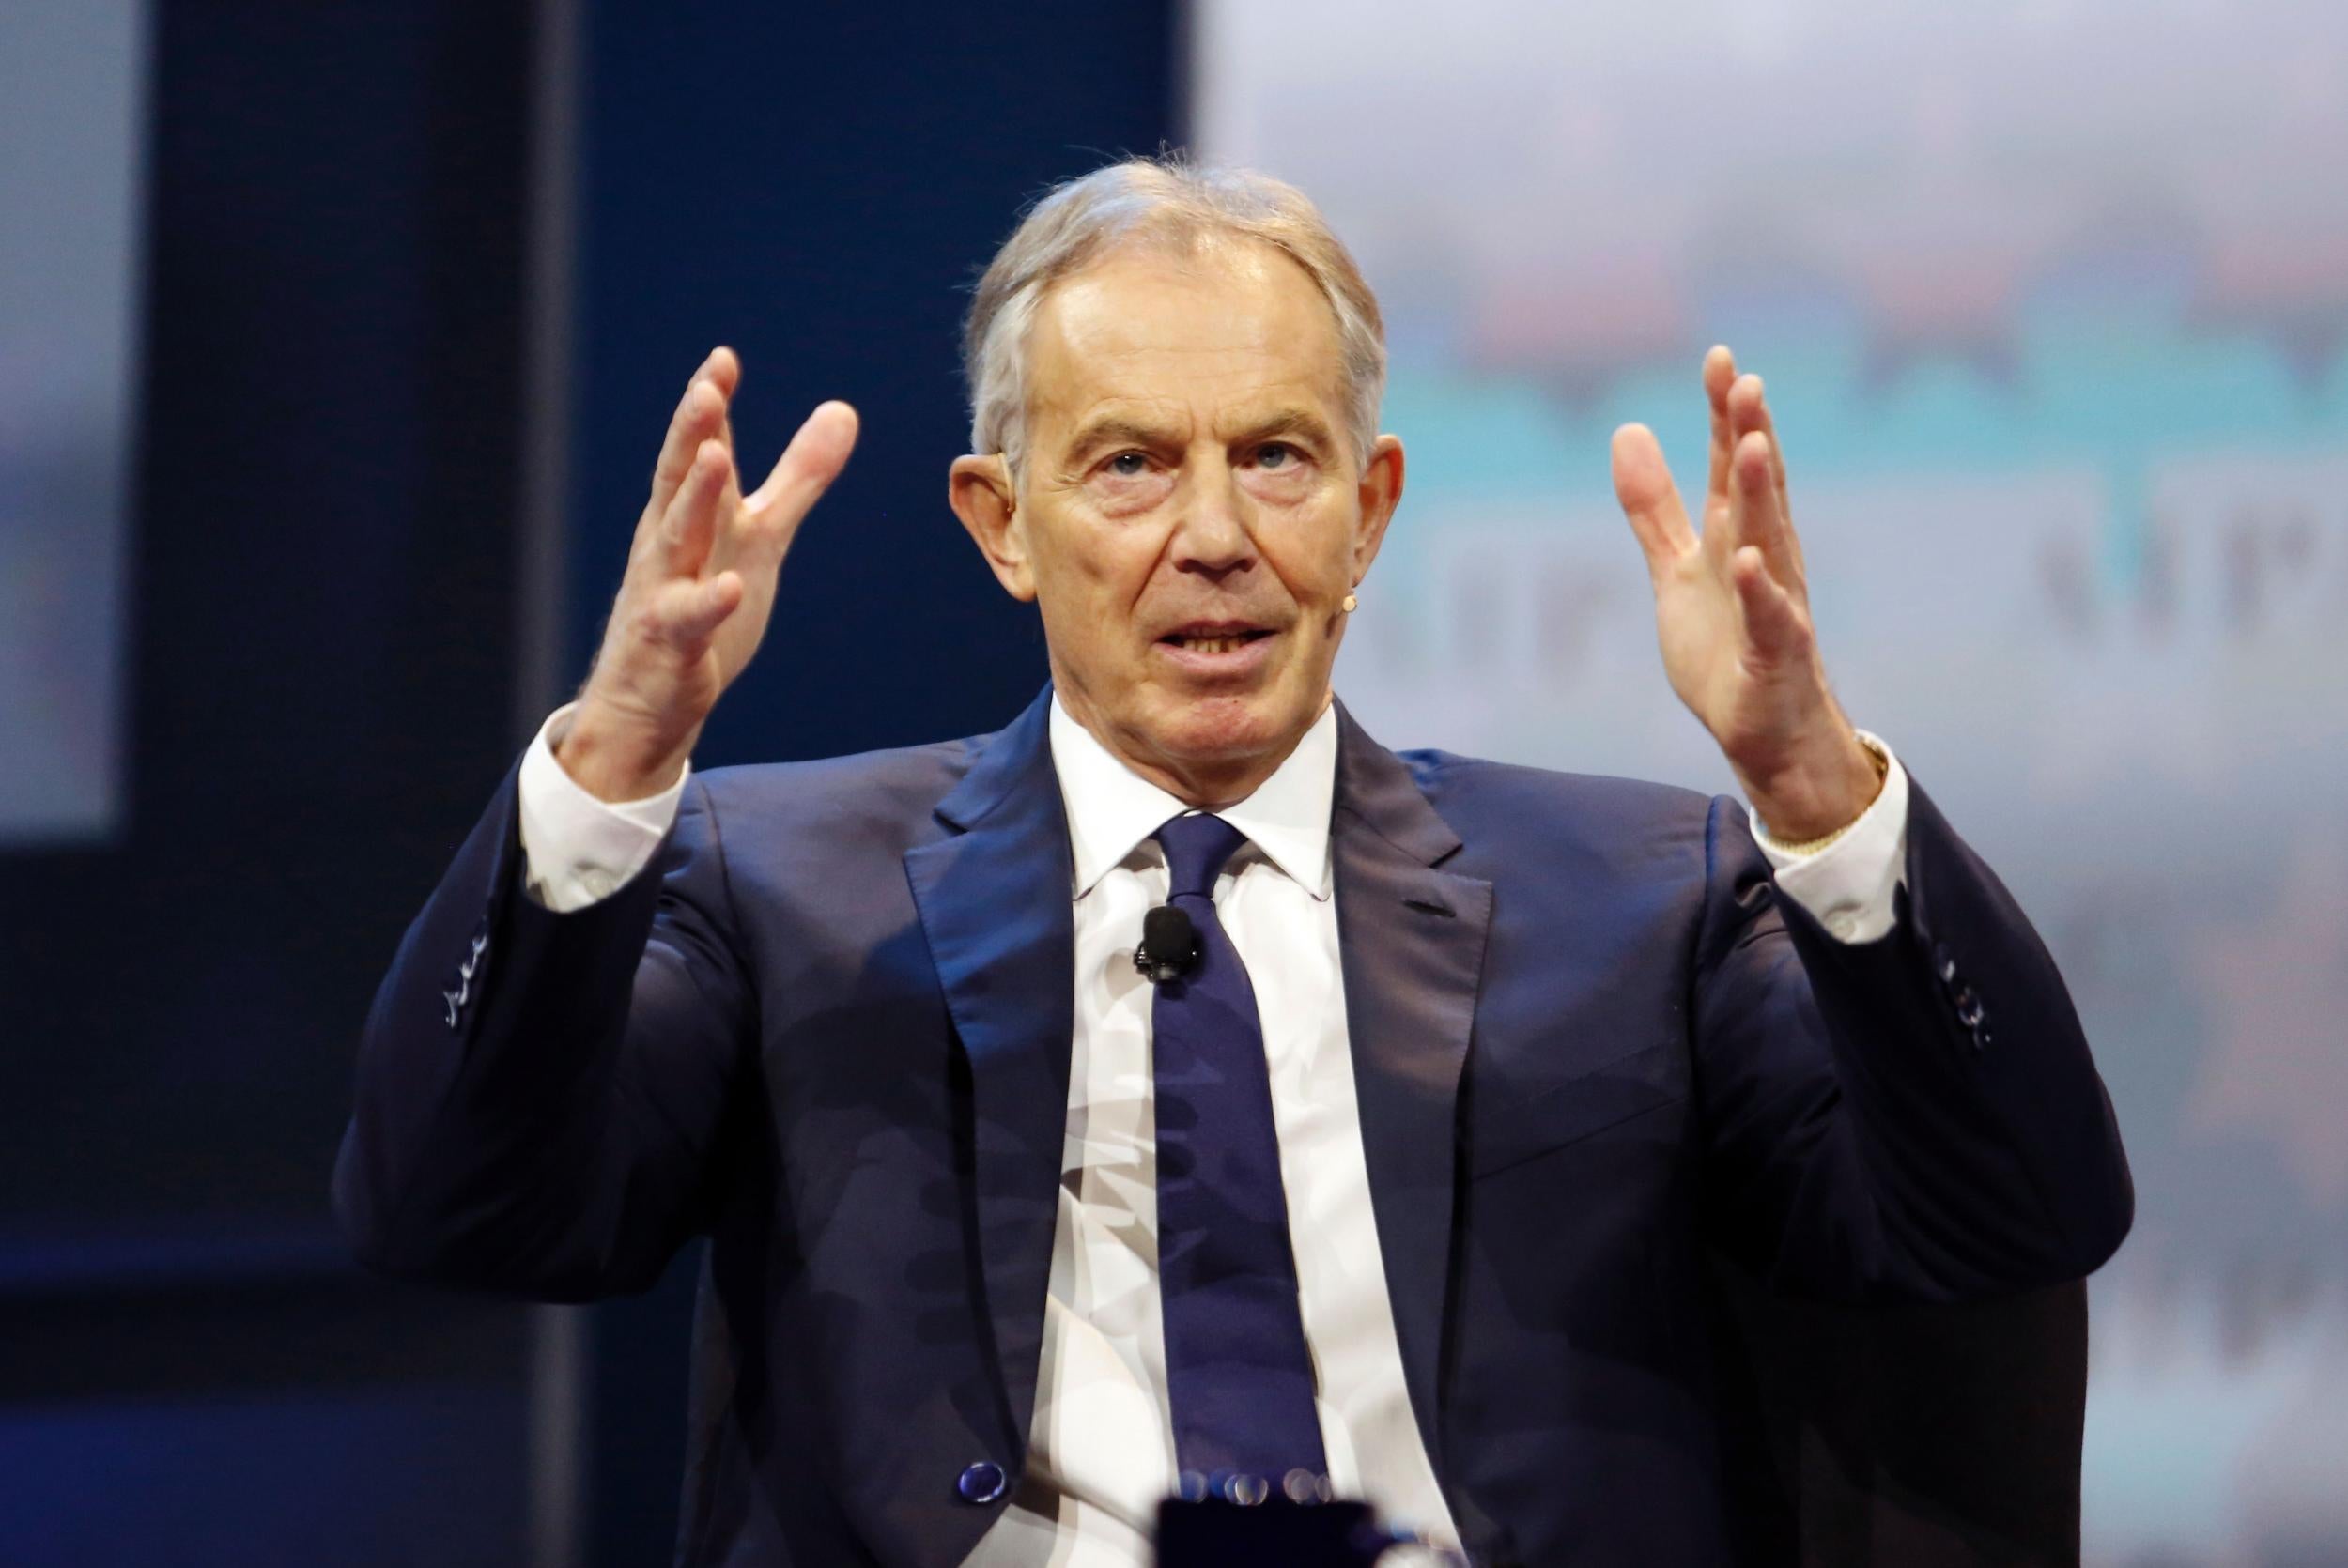 Tony Blair said French presidential candidate Emmanuel Macron should be an inspiration for Labour